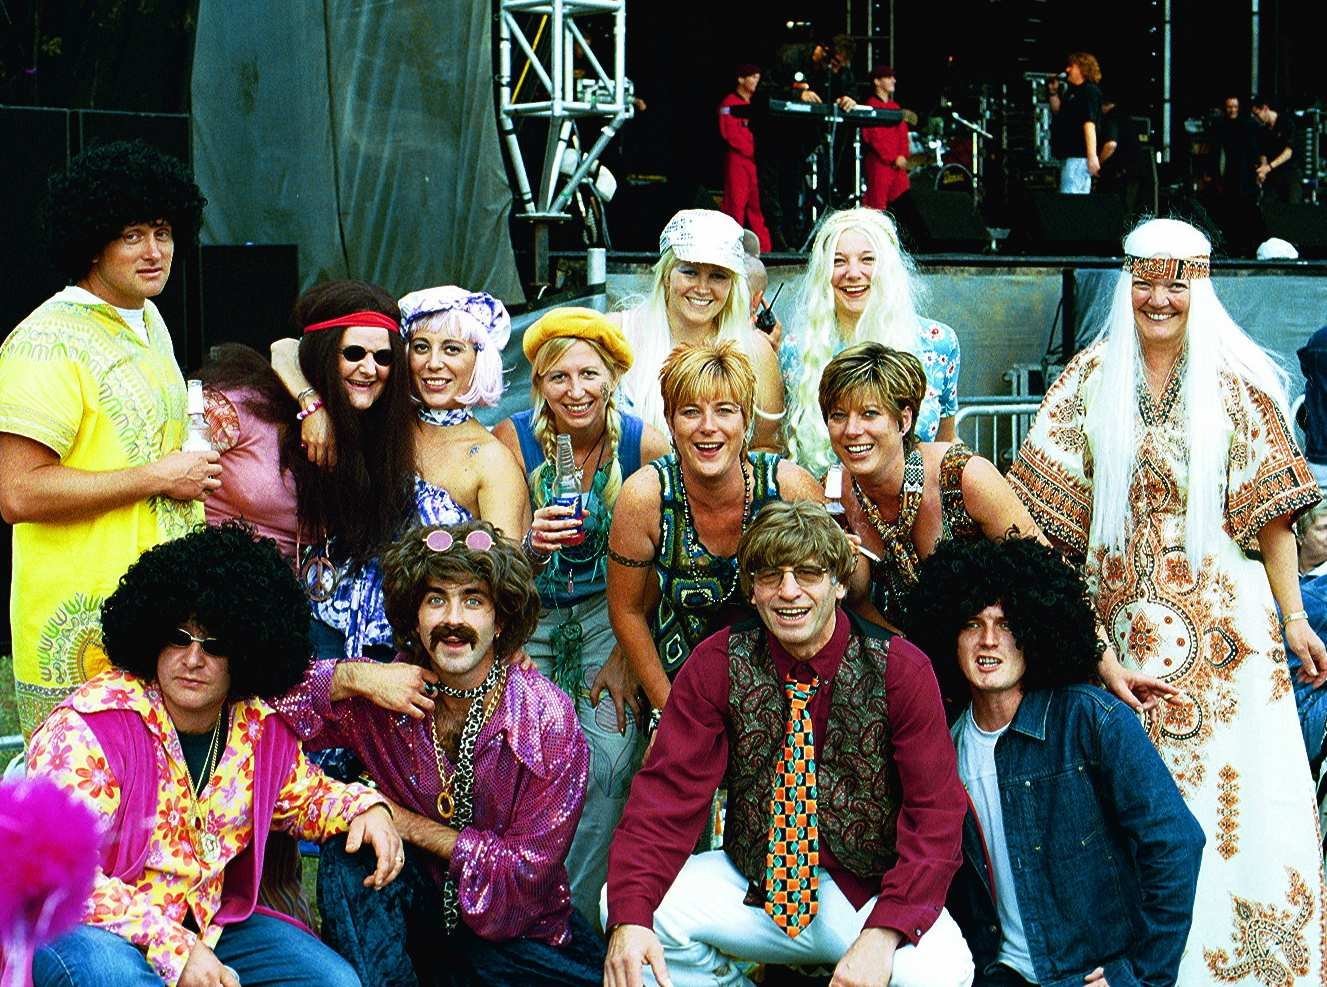 ROLLING BACK THE YEARS,ALL DRESSED UP HIPPY STYLE WATCHING THE SLADE CONCERT AT BROADLANDS, ROMSEY. PIC BY HARRY HERD. dig7245